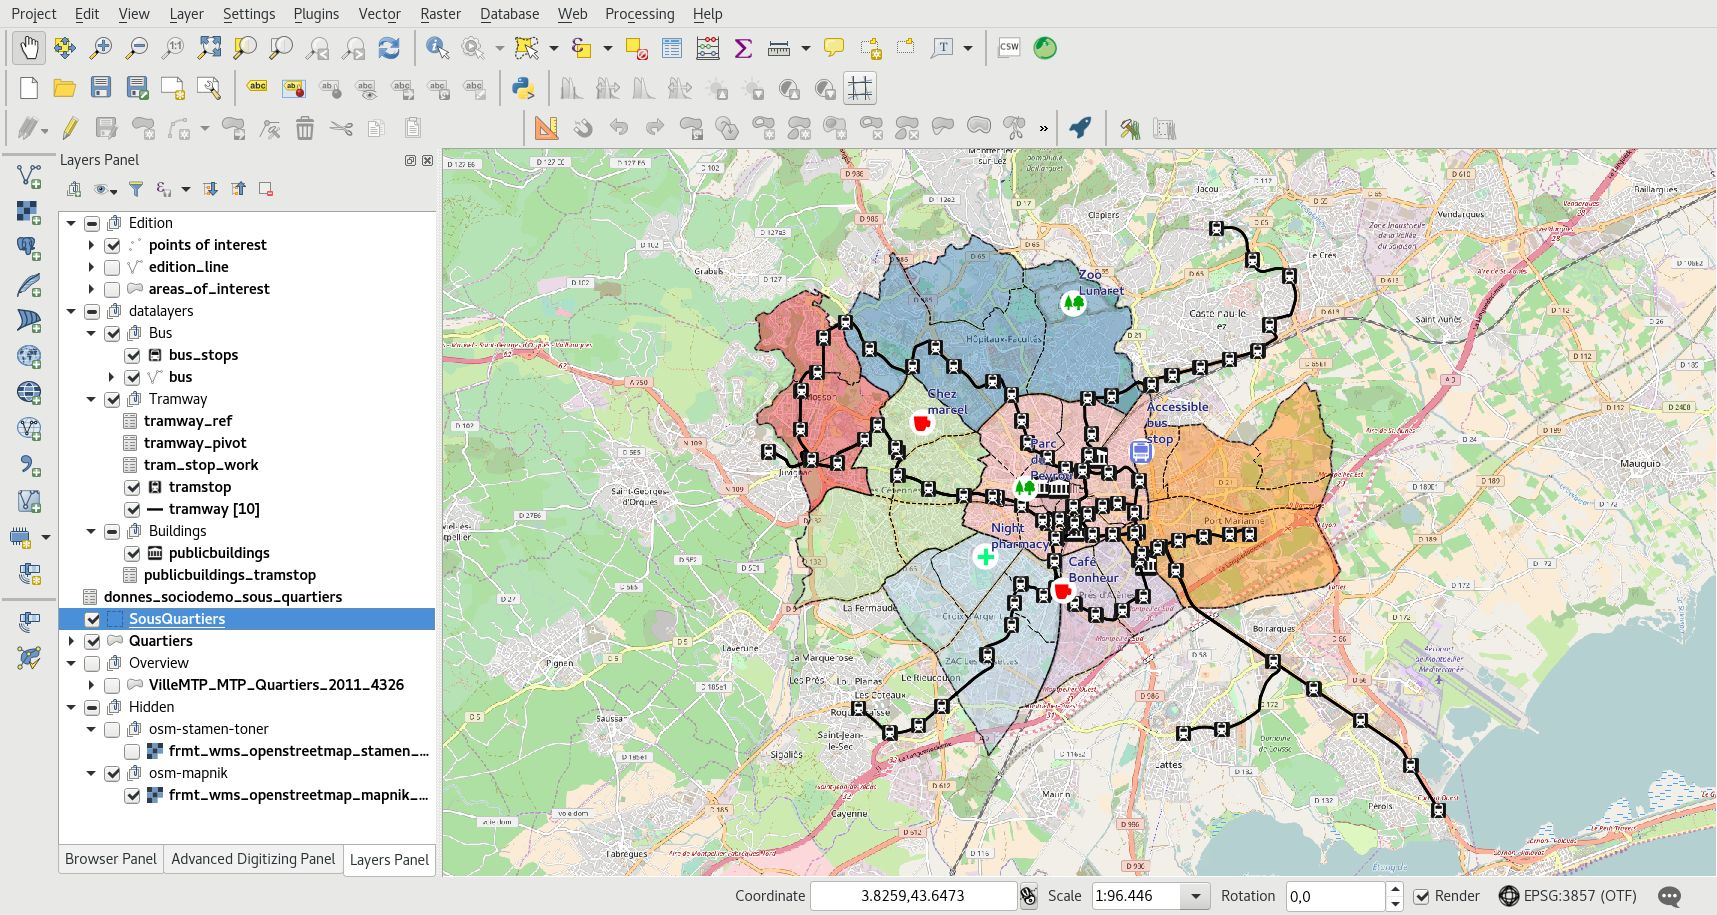 ../../_images/qgis-montpellier-project.jpg